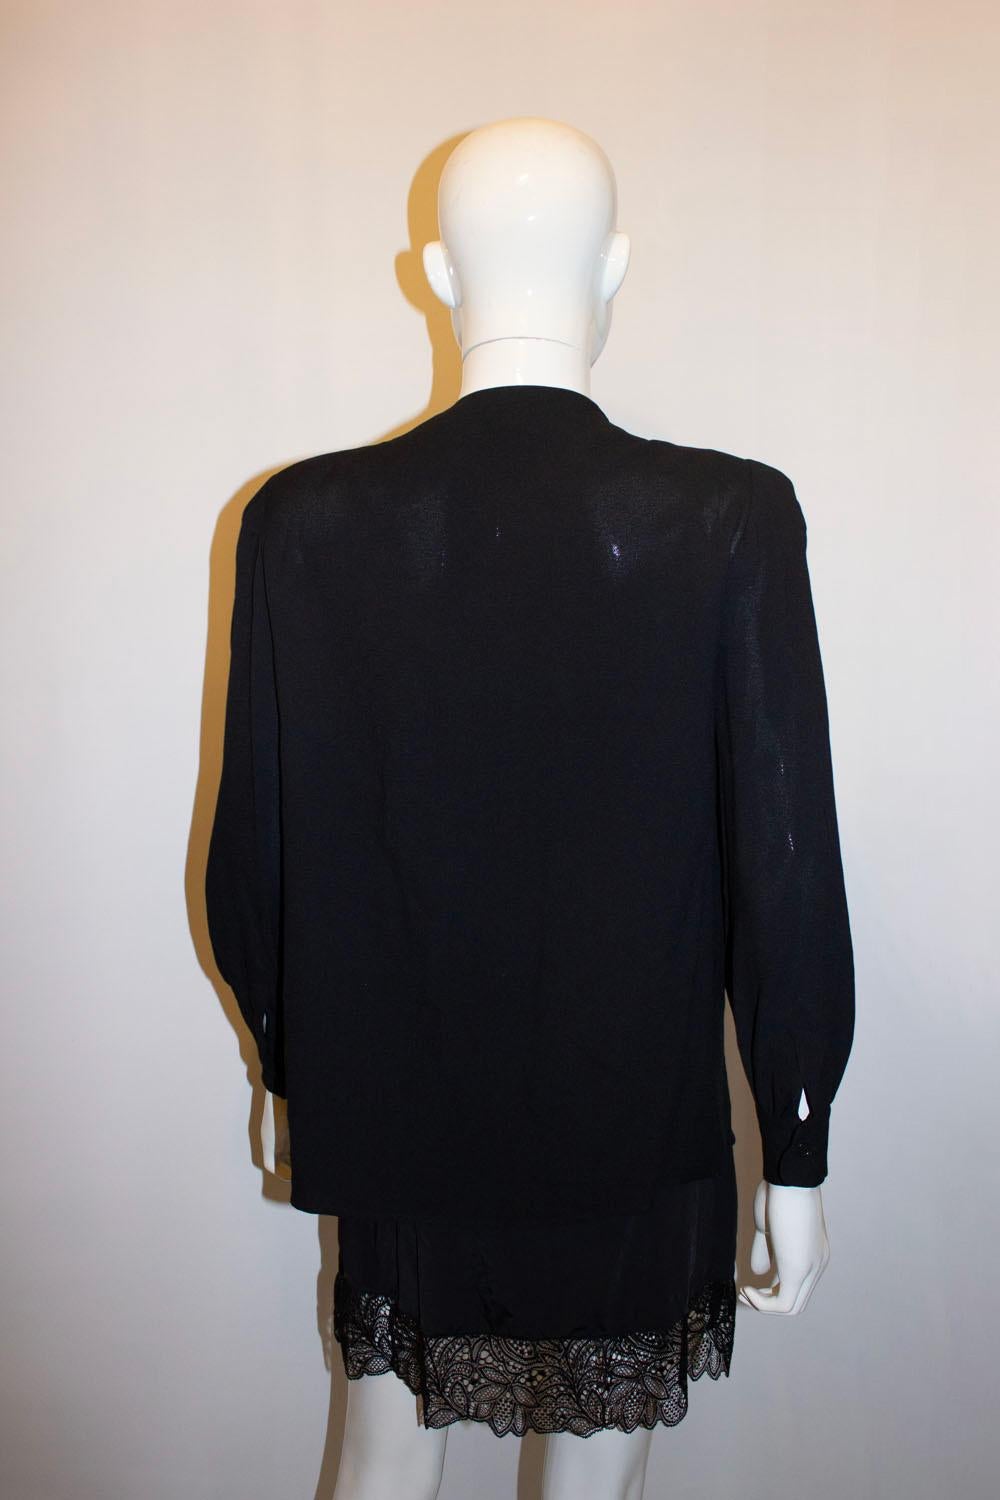 Vintage Yves Saint Laurent Rive Gauche Black Jacket In Good Condition For Sale In London, GB